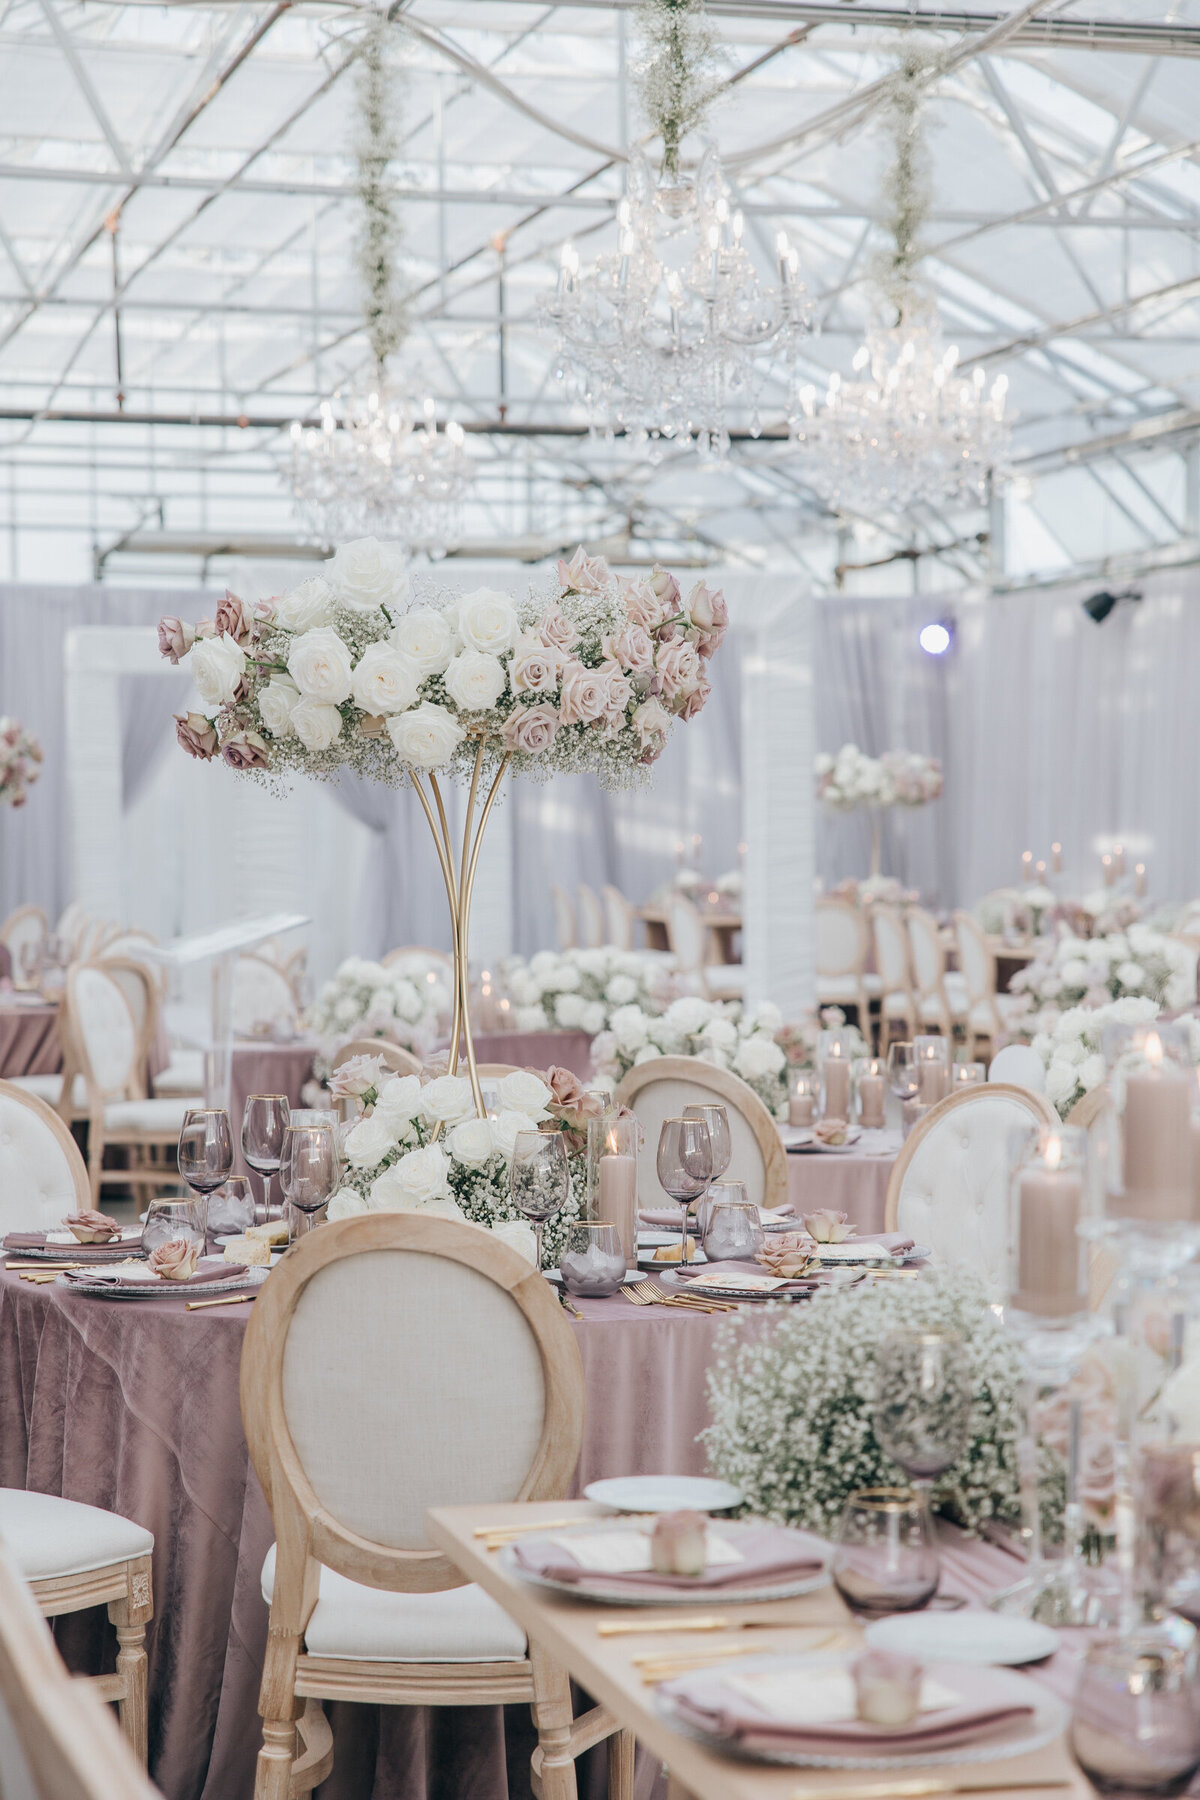 Glamorous white and pink florals at wedding dinner